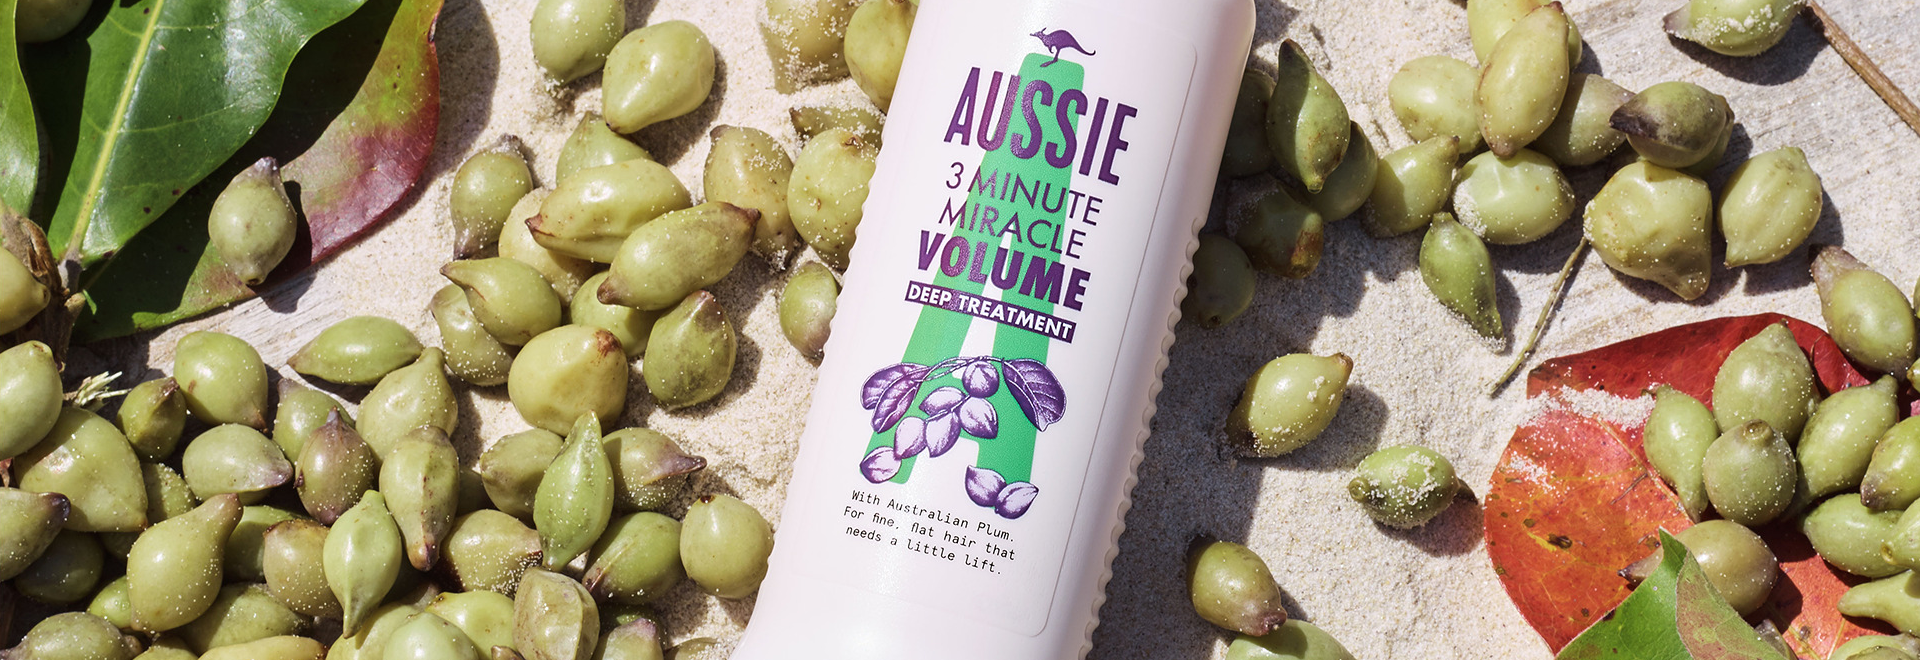 A photo of Aussie products lying on the sand surrounded by kakadu plums